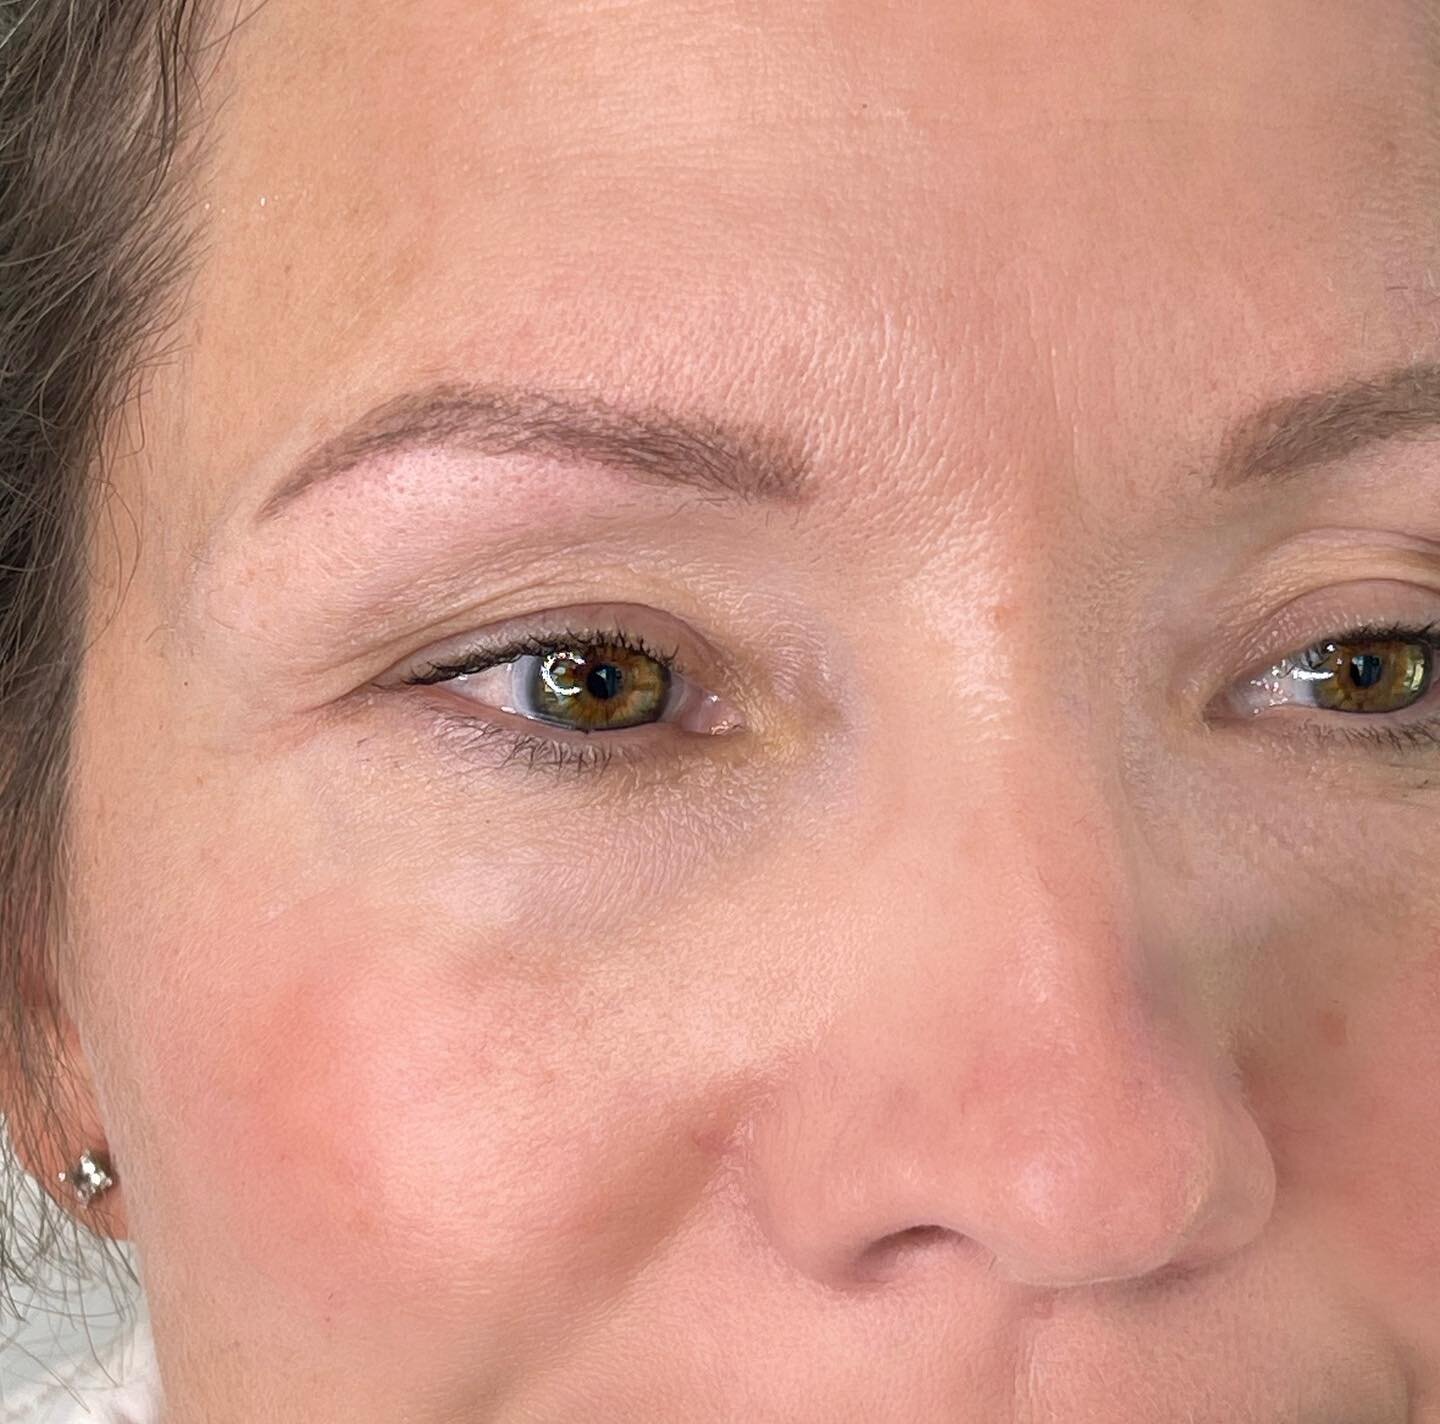 When this client walked in the shop my jaw hit the floor. These brows healed so soft and natural after just ONE session!!! 

Hello! My name is Morgan Young! I&rsquo;m an artist at the Little House of Ink. Julie Sherman @JewelsArtistry is my brow ment